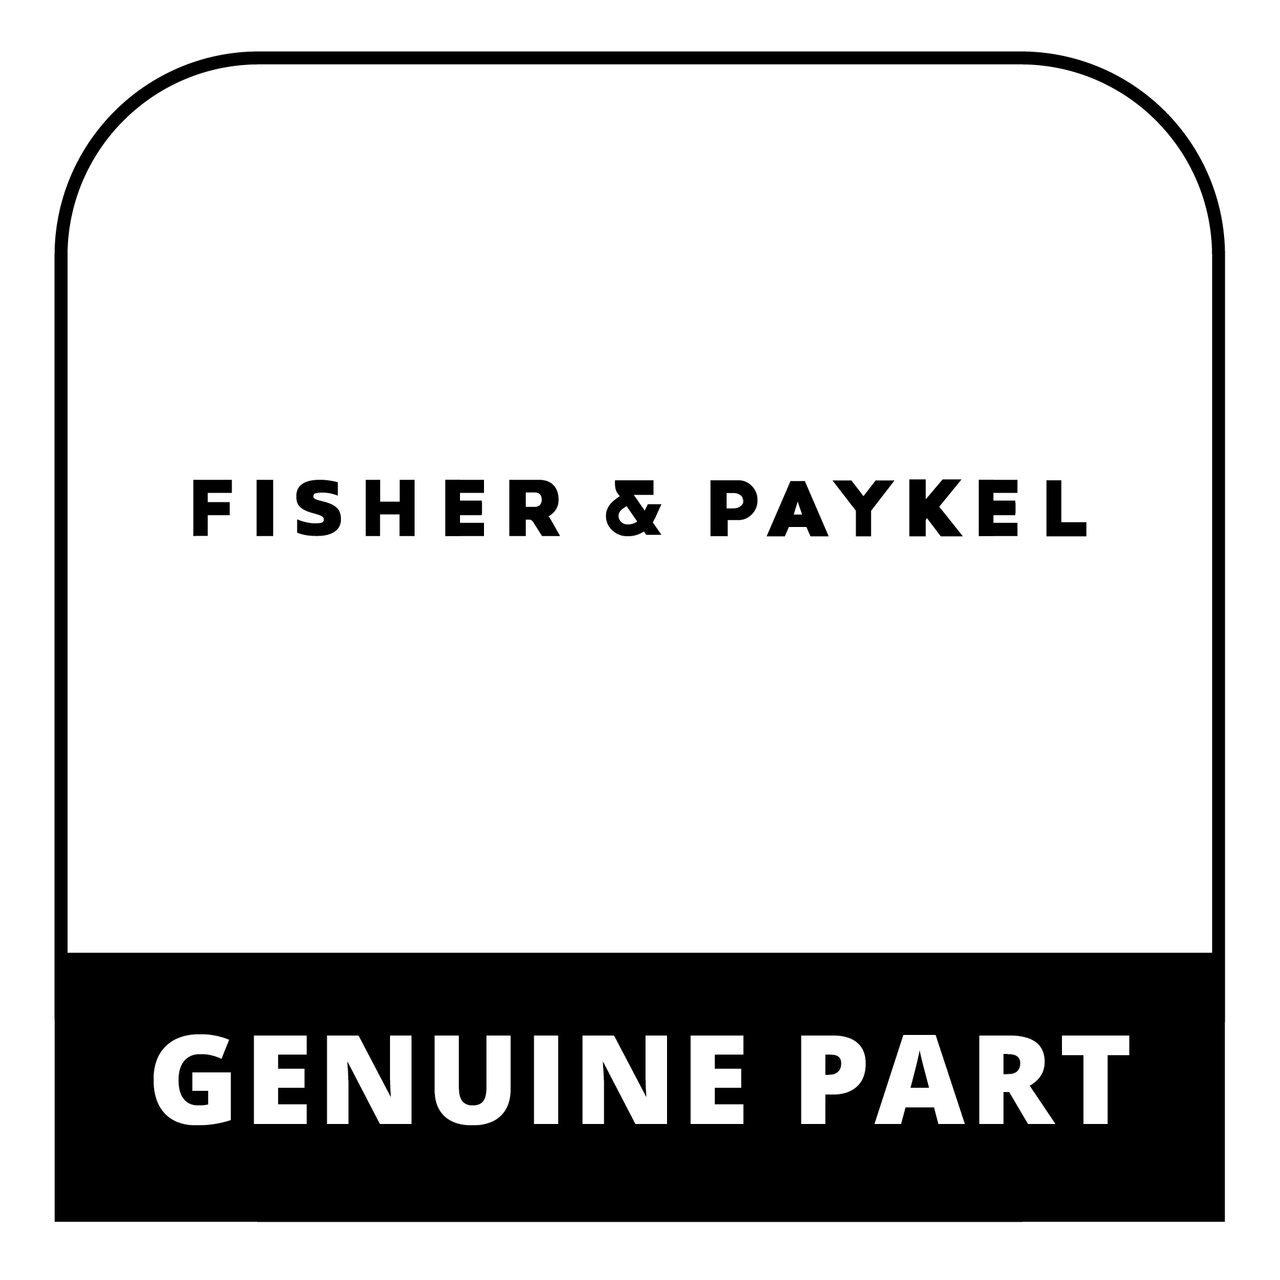 Fisher & Paykel 575097 - Bracket Manifold - Discontinued 9/19 MT - Genuine Fisher & Paykel (DCS) Part